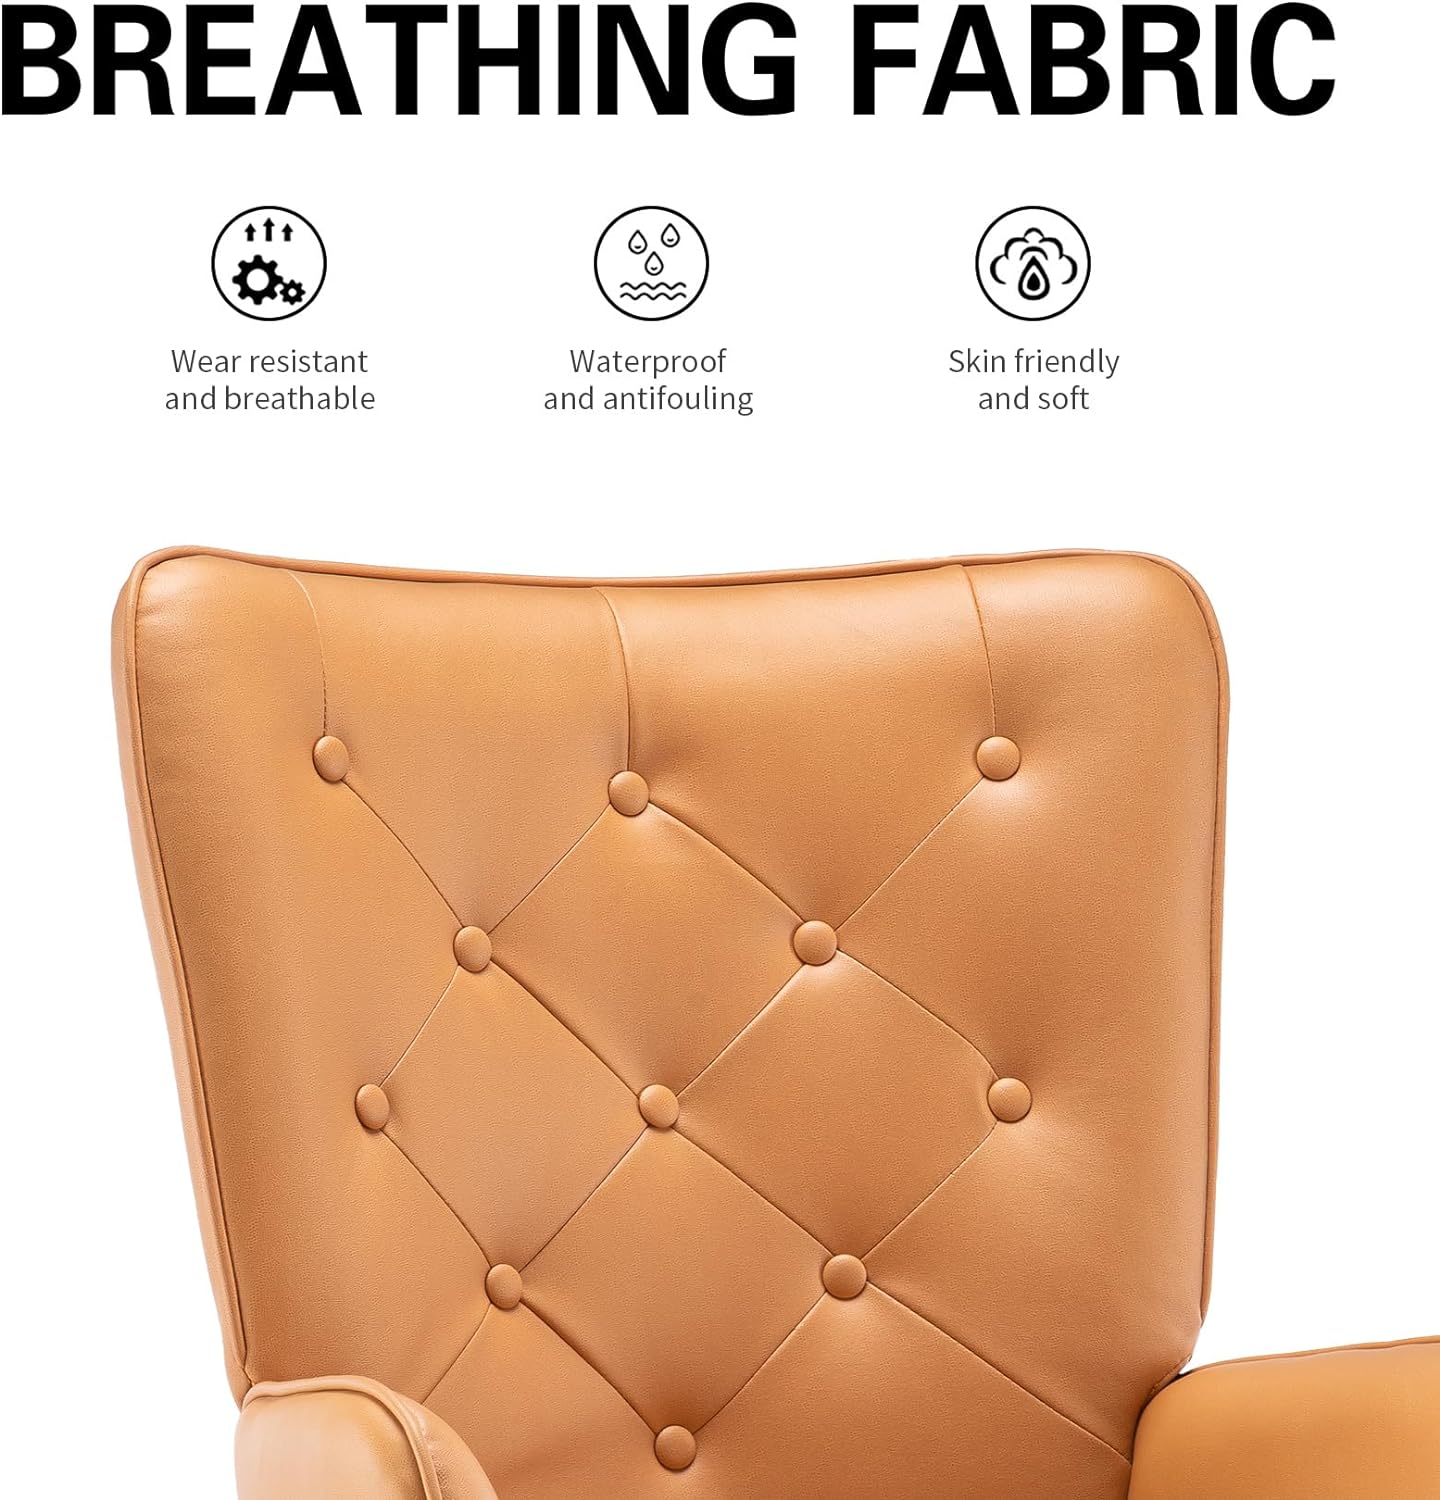 UNICOO - High Wingback Living Room Chairs, Vintage Button Wingback Chair, Velvet Side Chair Leisure Chair Wingback Reading Chair for Living Room Bedroom Waiting Room